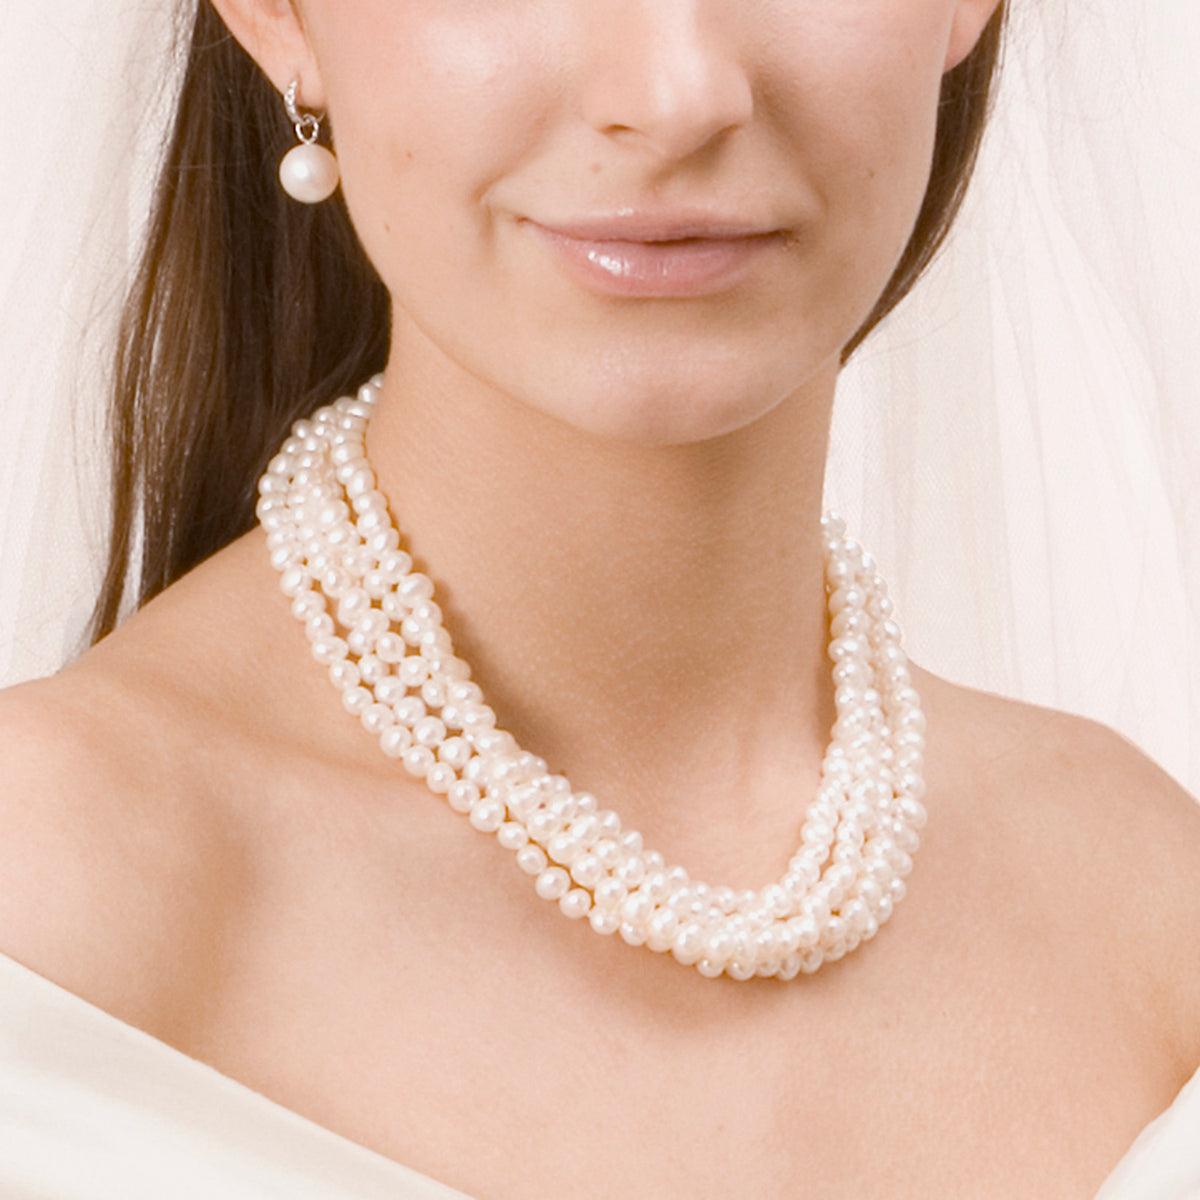 White Freshwater Pearl 5 Strand Necklace